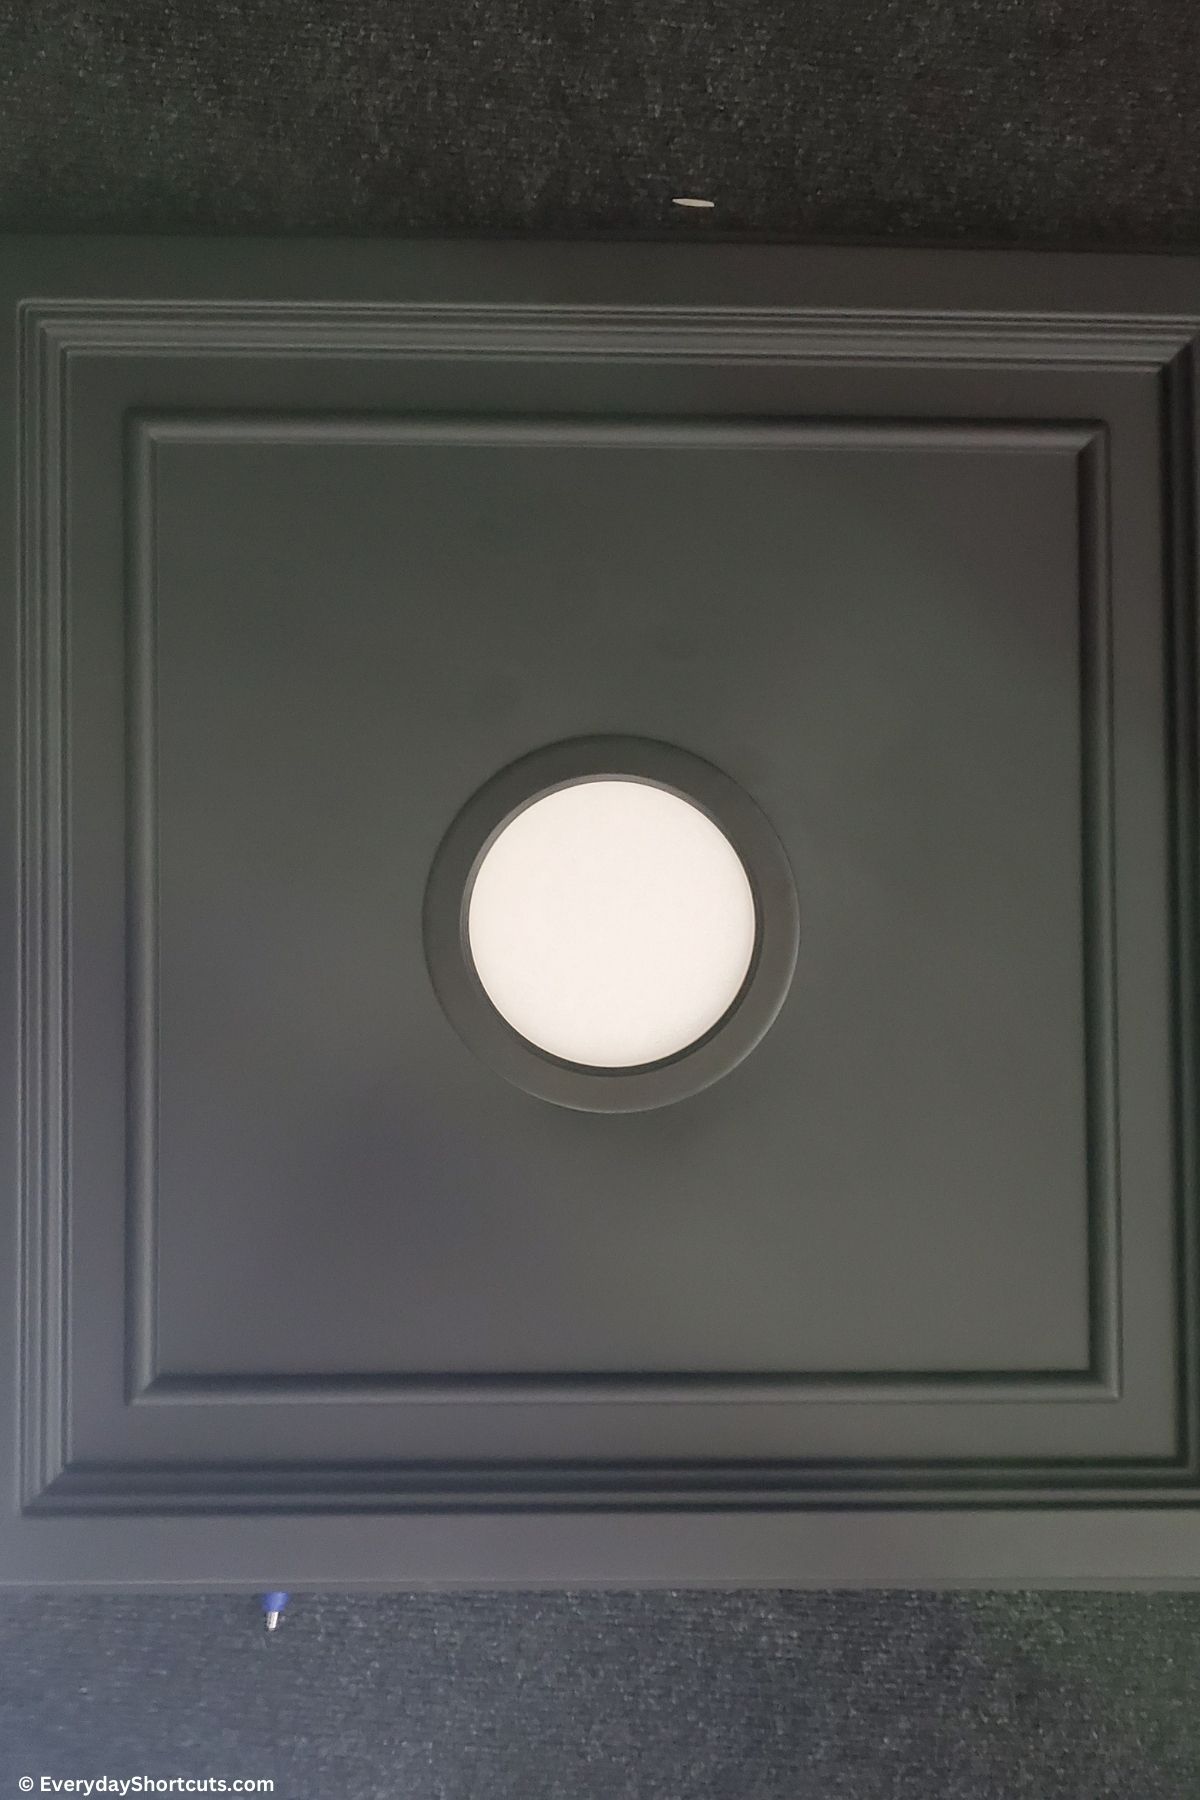 LED recessed lighting in drop down ceiling